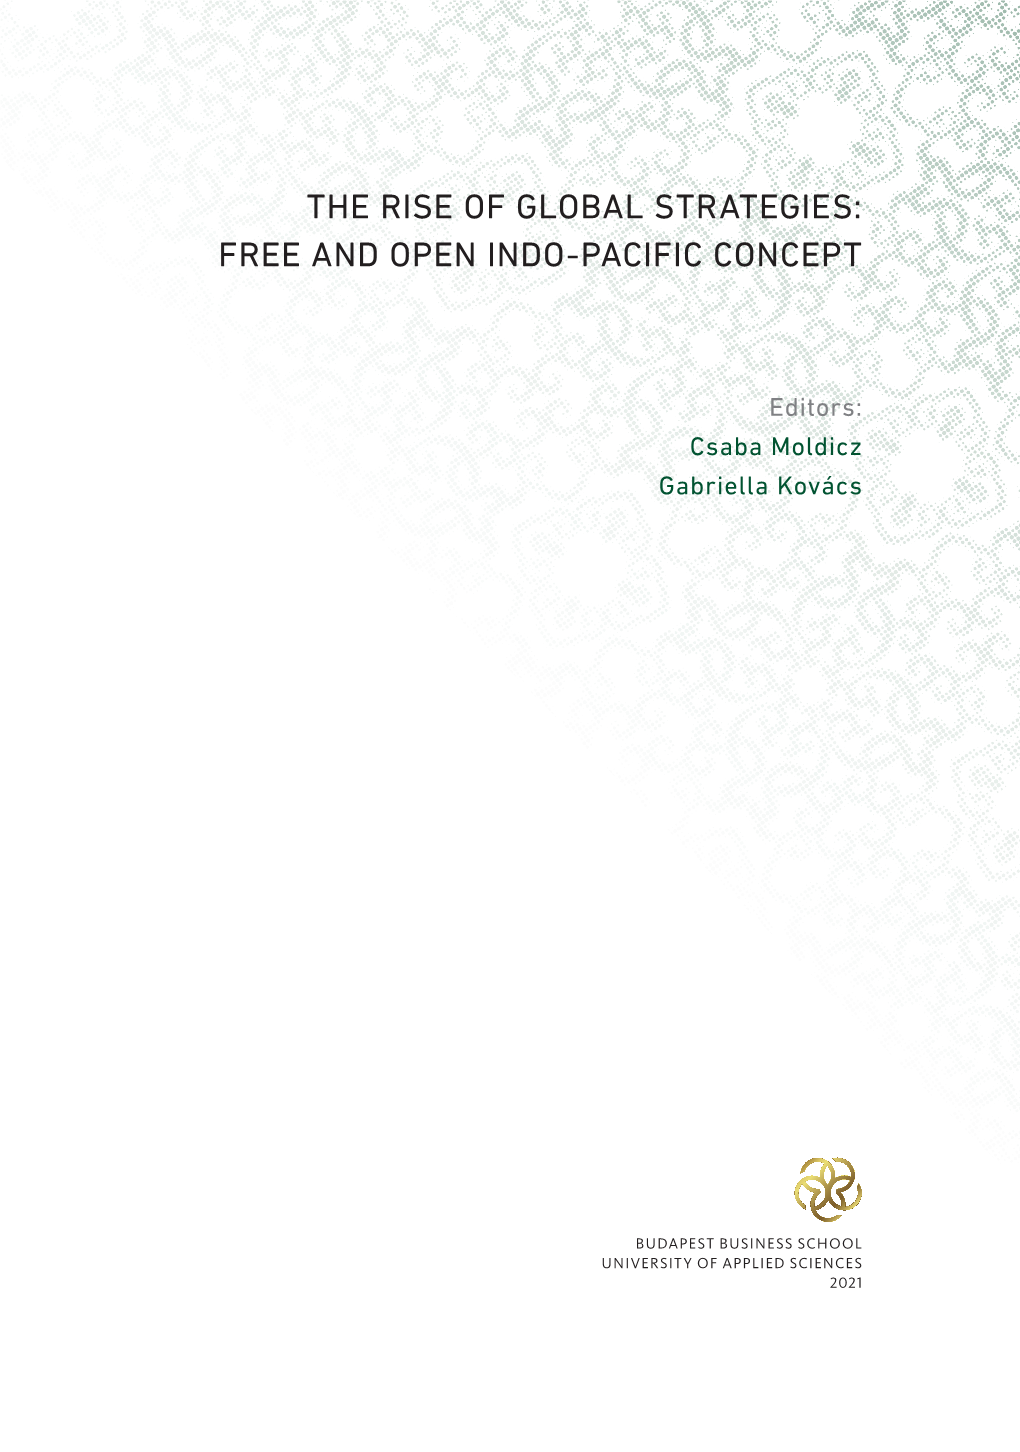 Free and Open Indo-Pacific Concept